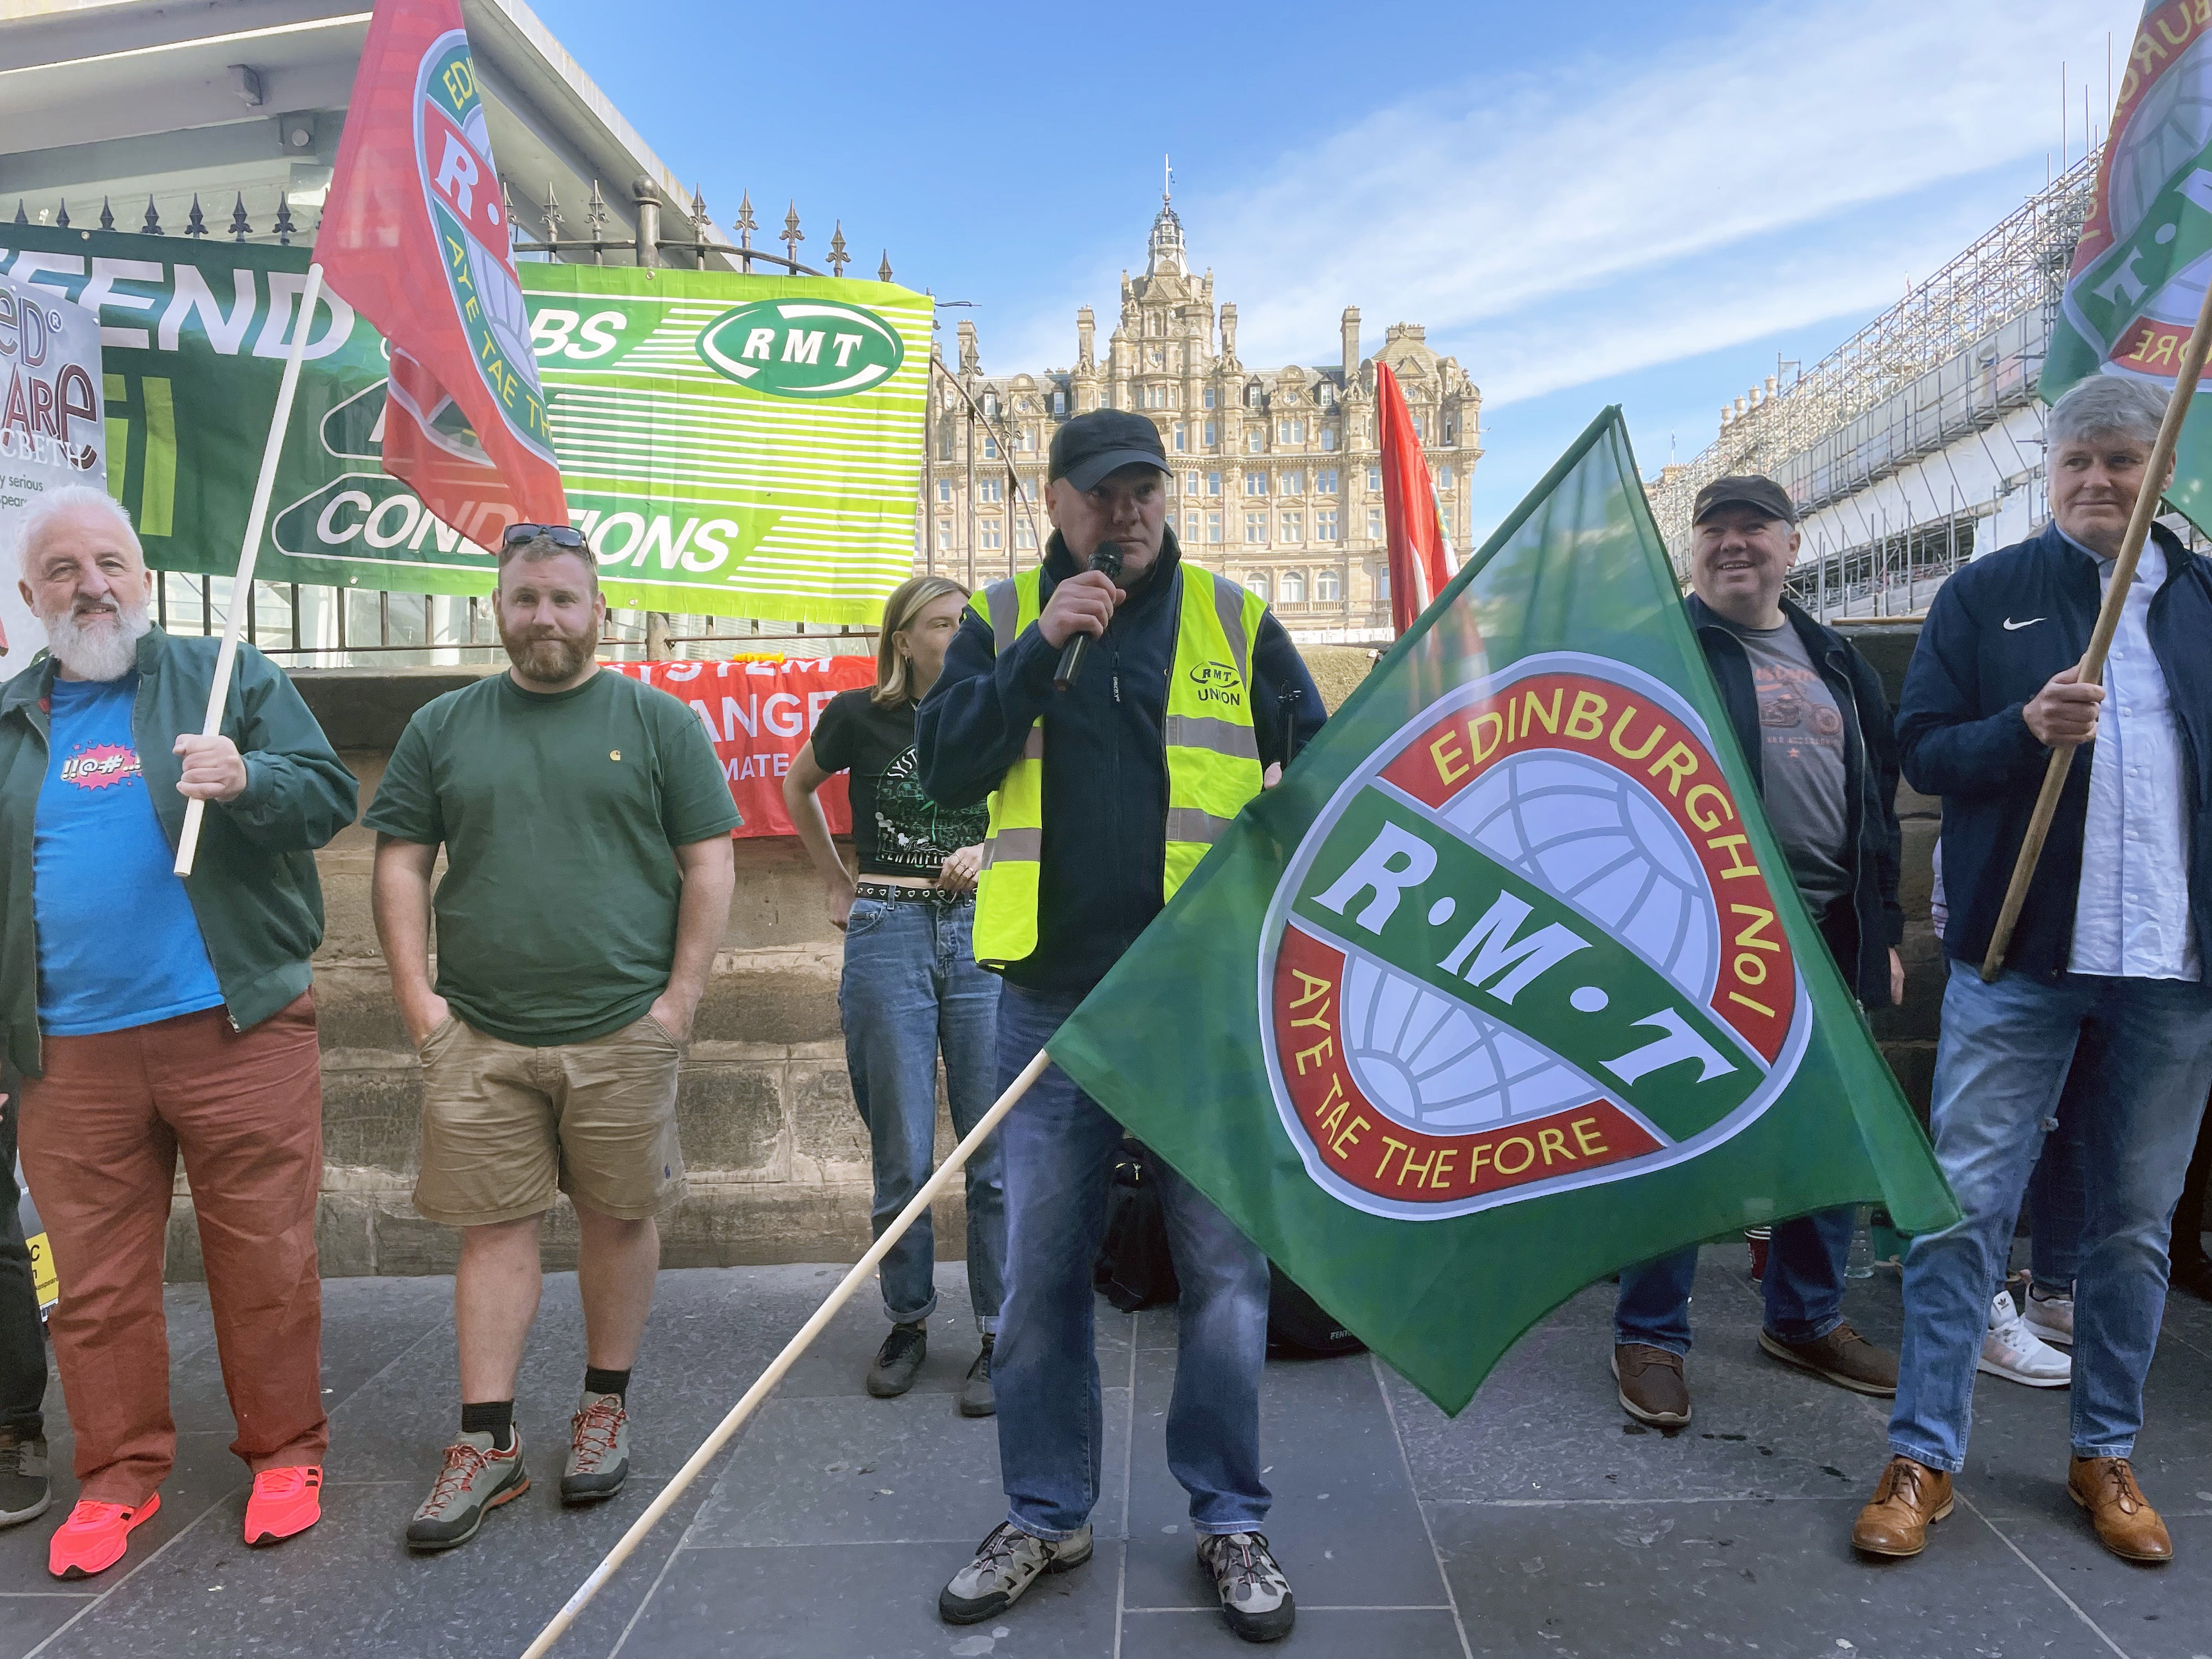 Members of the Rail, Maritime and Transport union (RMT) will take further strike action over pay, jobs and conditions on August 18 and 20. (Katharine Hay/PA)